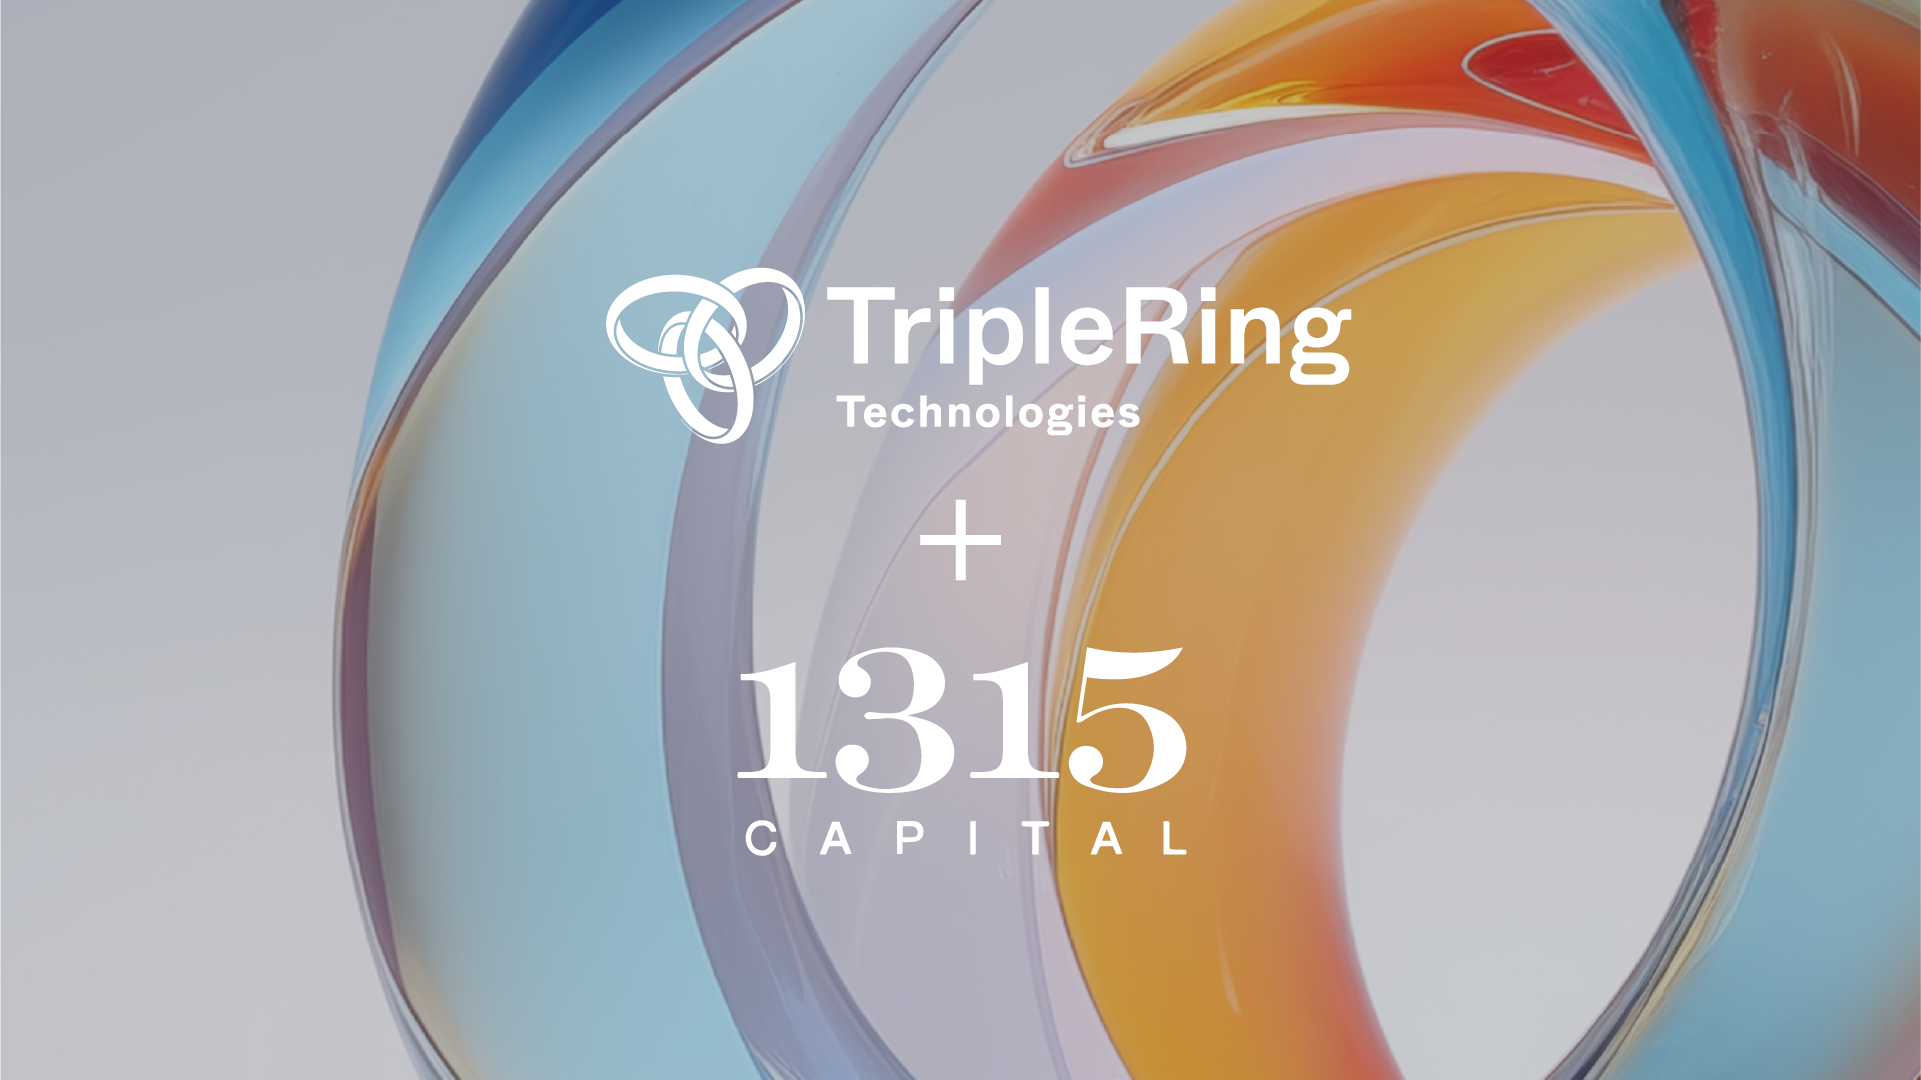 Triple ring technologies announces partnership with 1315 capital.